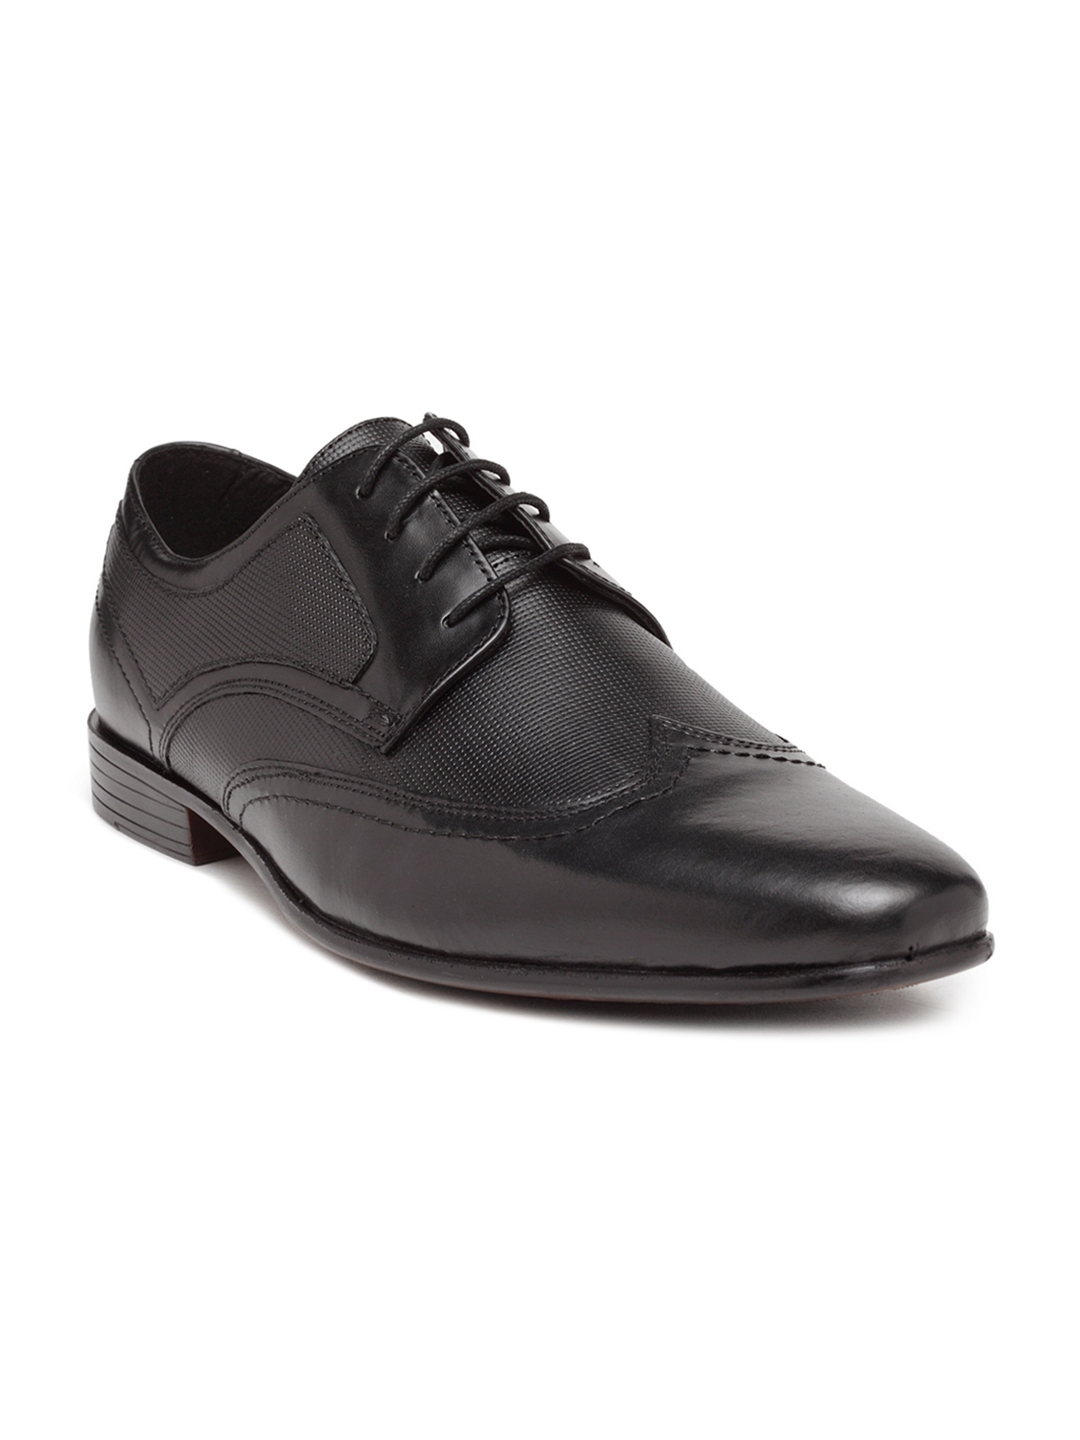 Buy NOBLE CURVE Black Leather Brogues Shoes With Textured Vamp - Formal ...